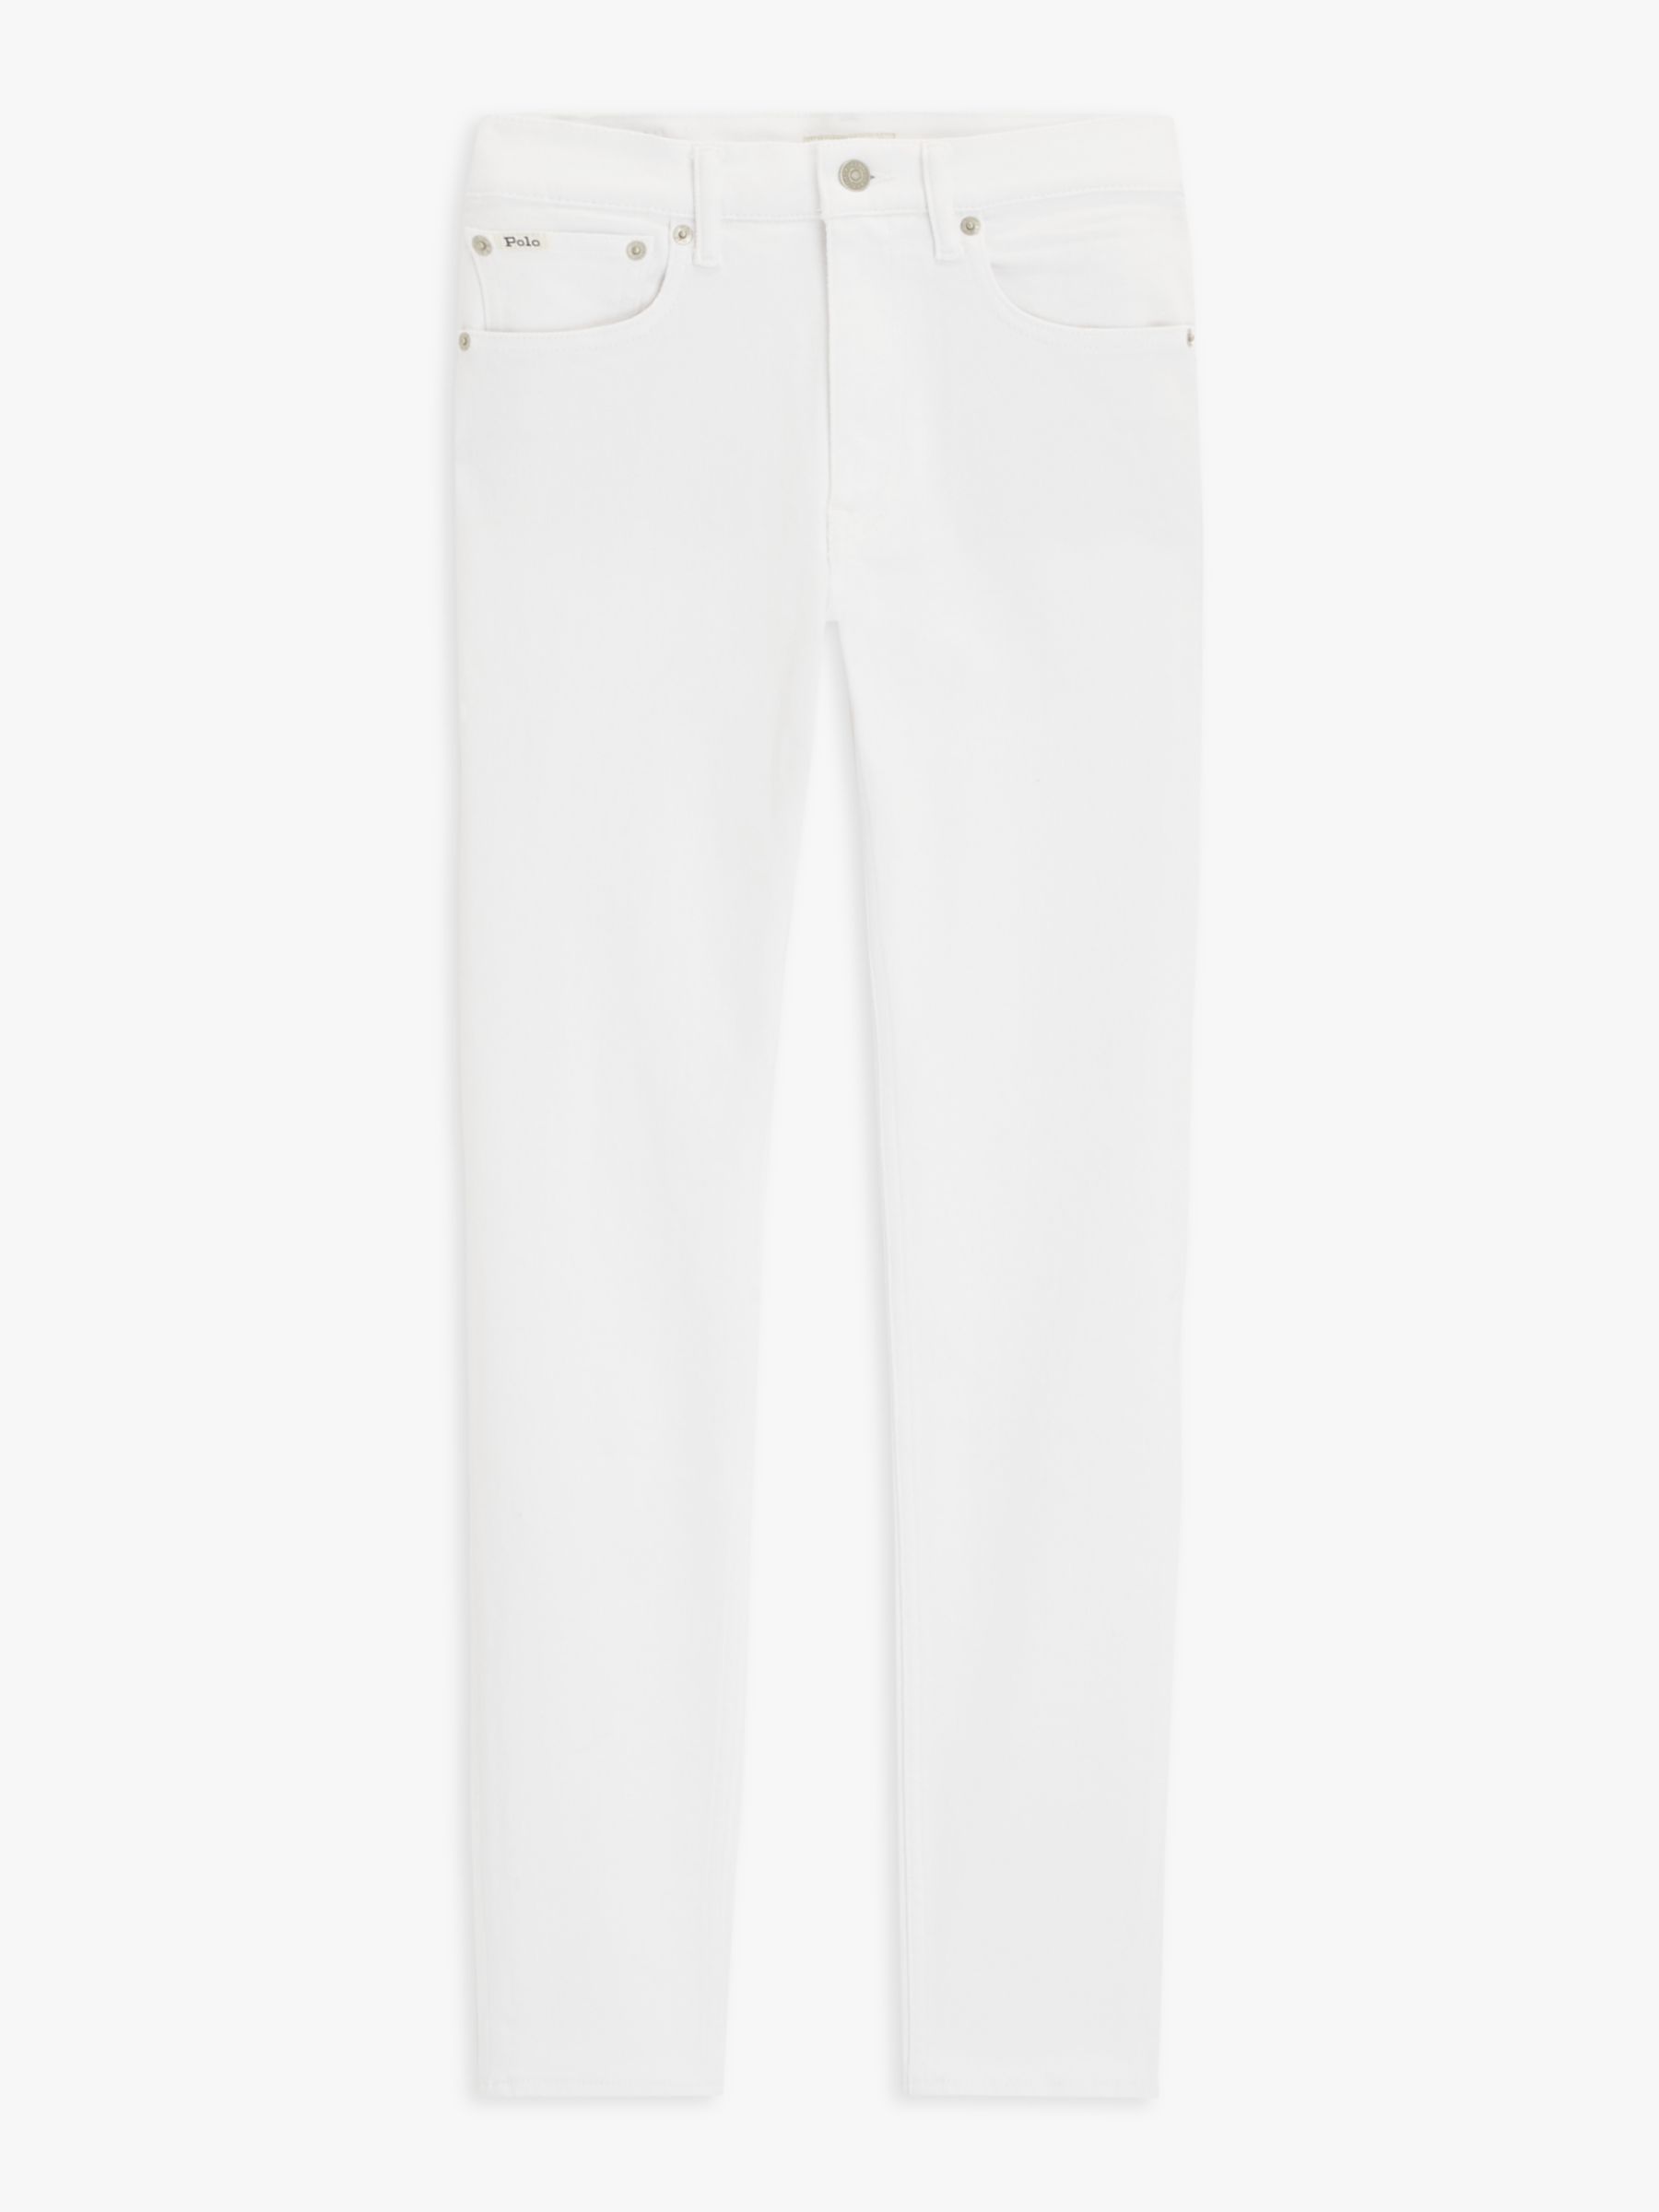 Polo Ralph Lauren Mid Rise Skinny Jeans, Amesbury Wash, 26